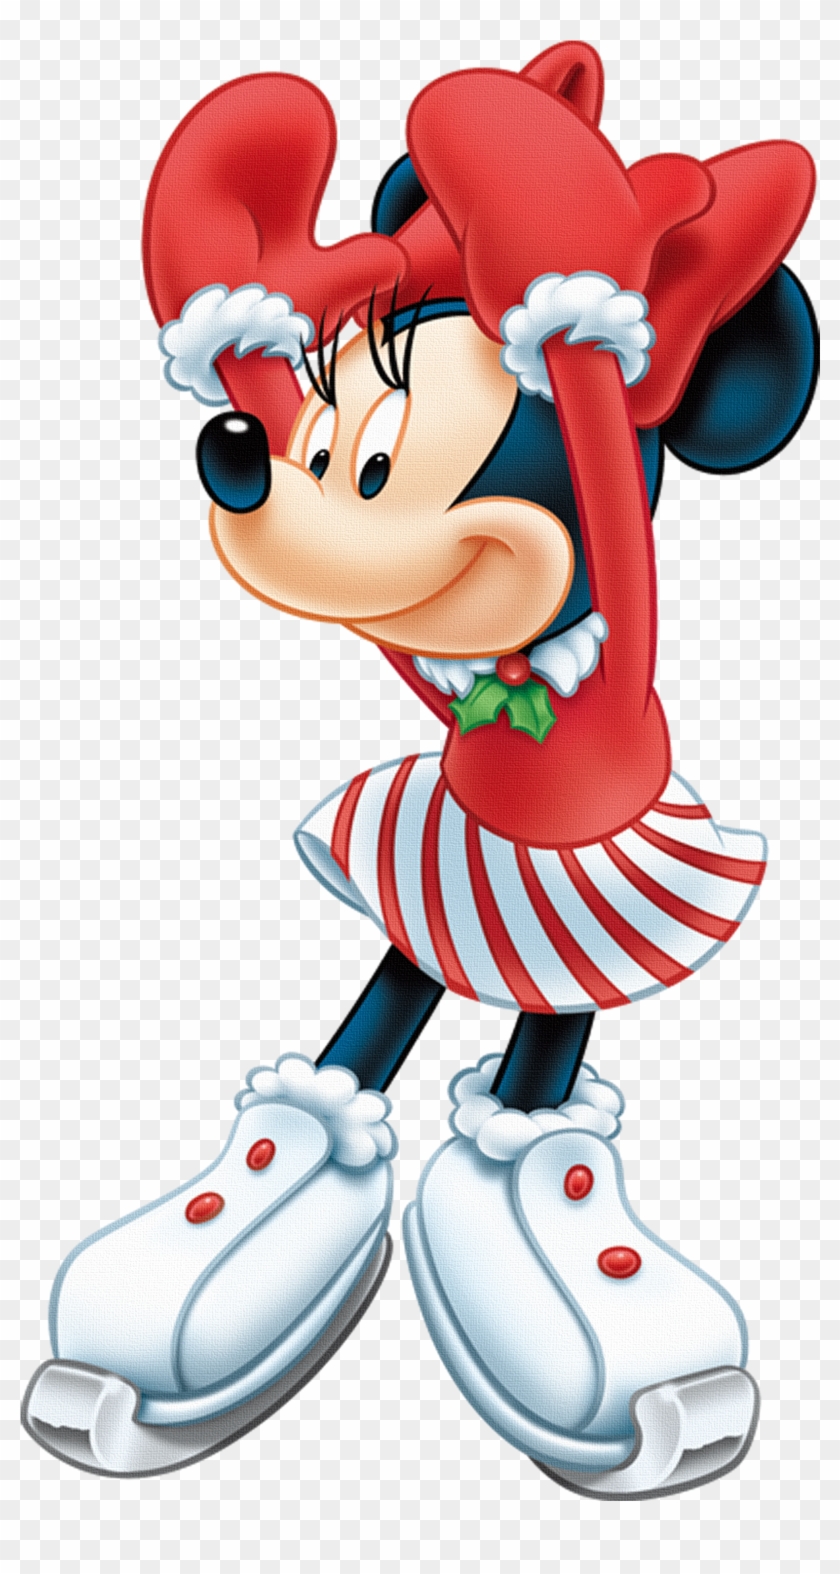 Minnie Mouse Png Image Mickey Mouse Girl Png Transparent Png 623x768 Pngfind